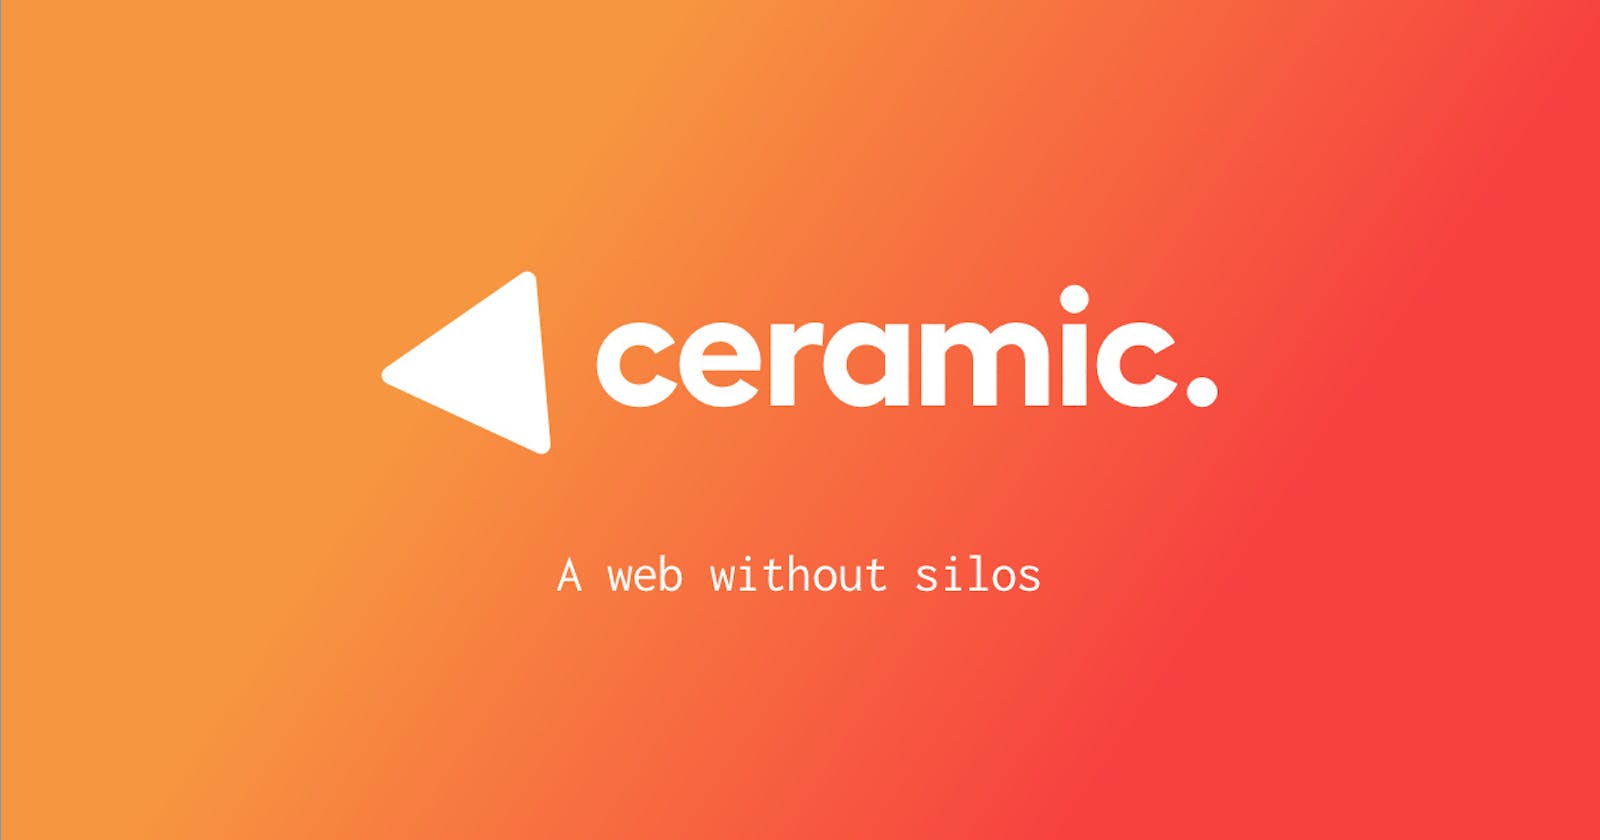 Developers guide to the differences between Ceramic and ComposeDB